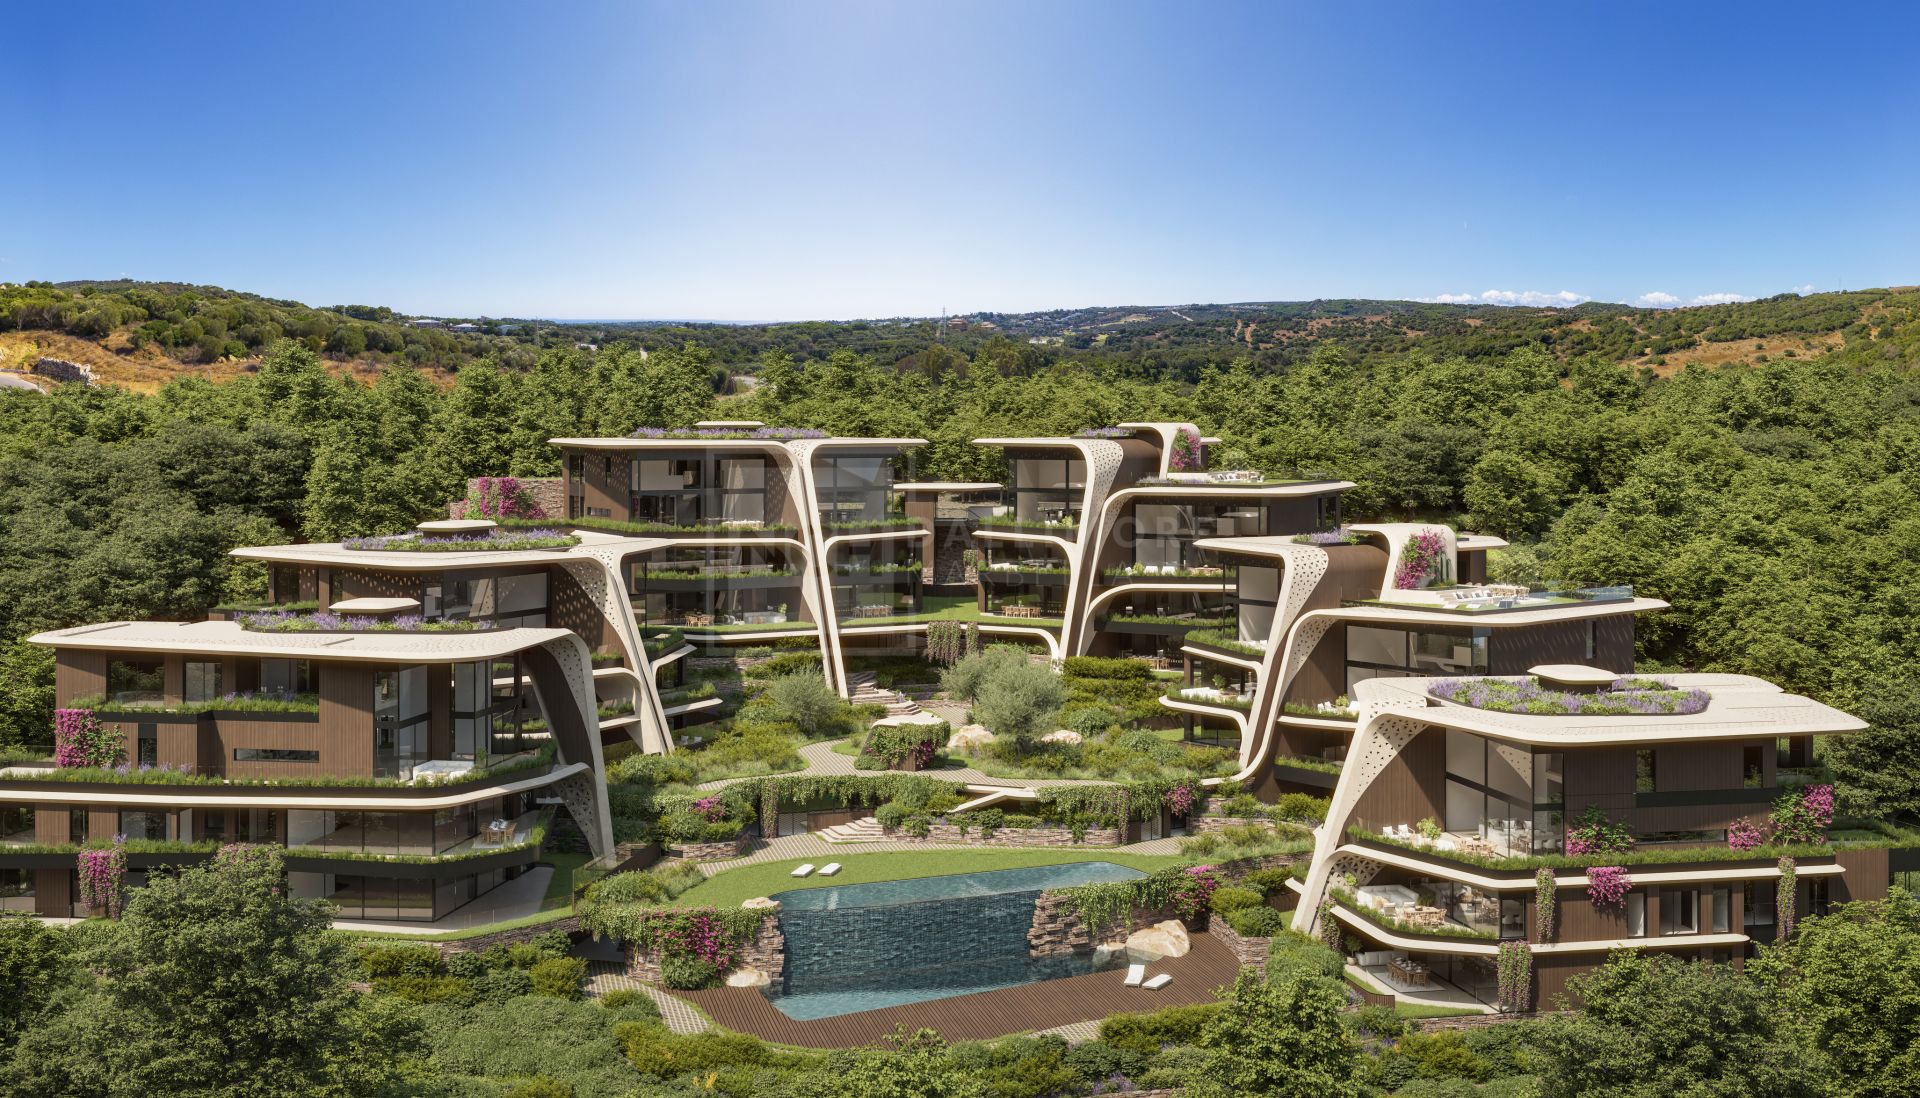 LUXURIOUS 3 BEDROOM CONTEMPORARY PENTHOUSE APARTMENT WITHIN SUSTAINABLE DEVELOPMENT SOTOGRANDE